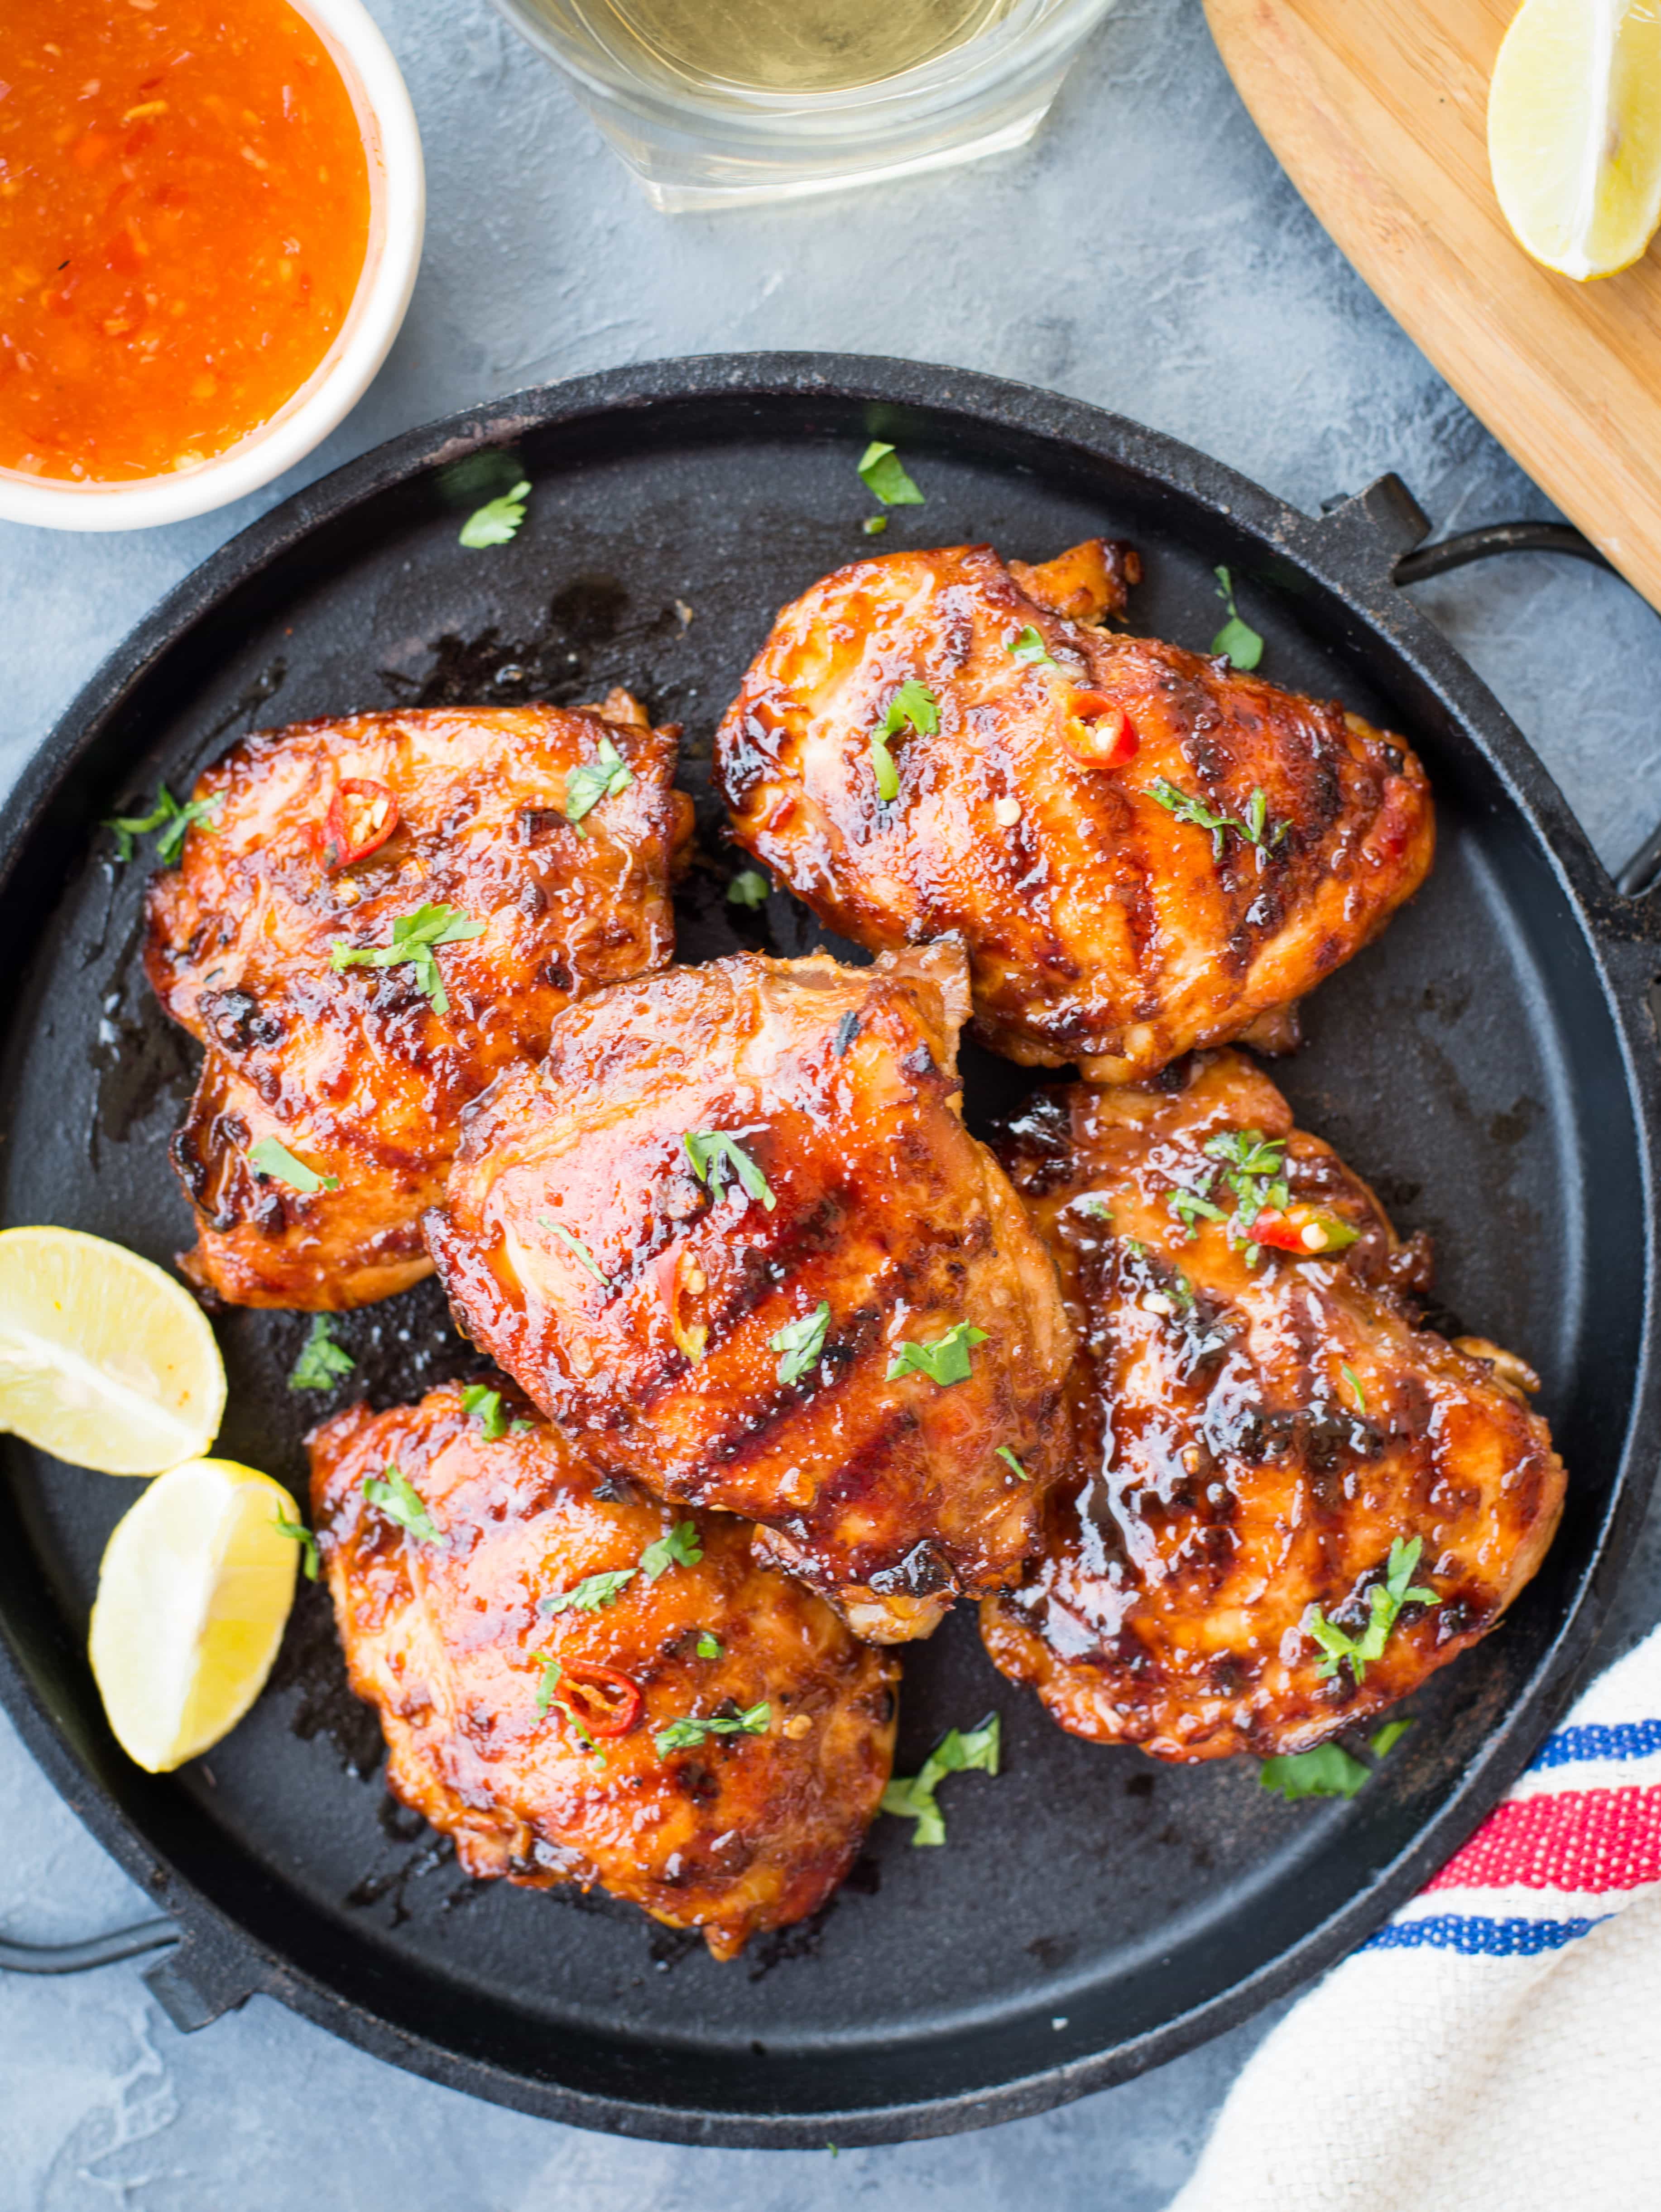 This Sweet and Spicy Thai Grilled Chicken has real Thai flavours. Chicken thighs marinated in Thai Sweet Chili Sauce, Lemongrass, fish sauce and grilled to perfection. 